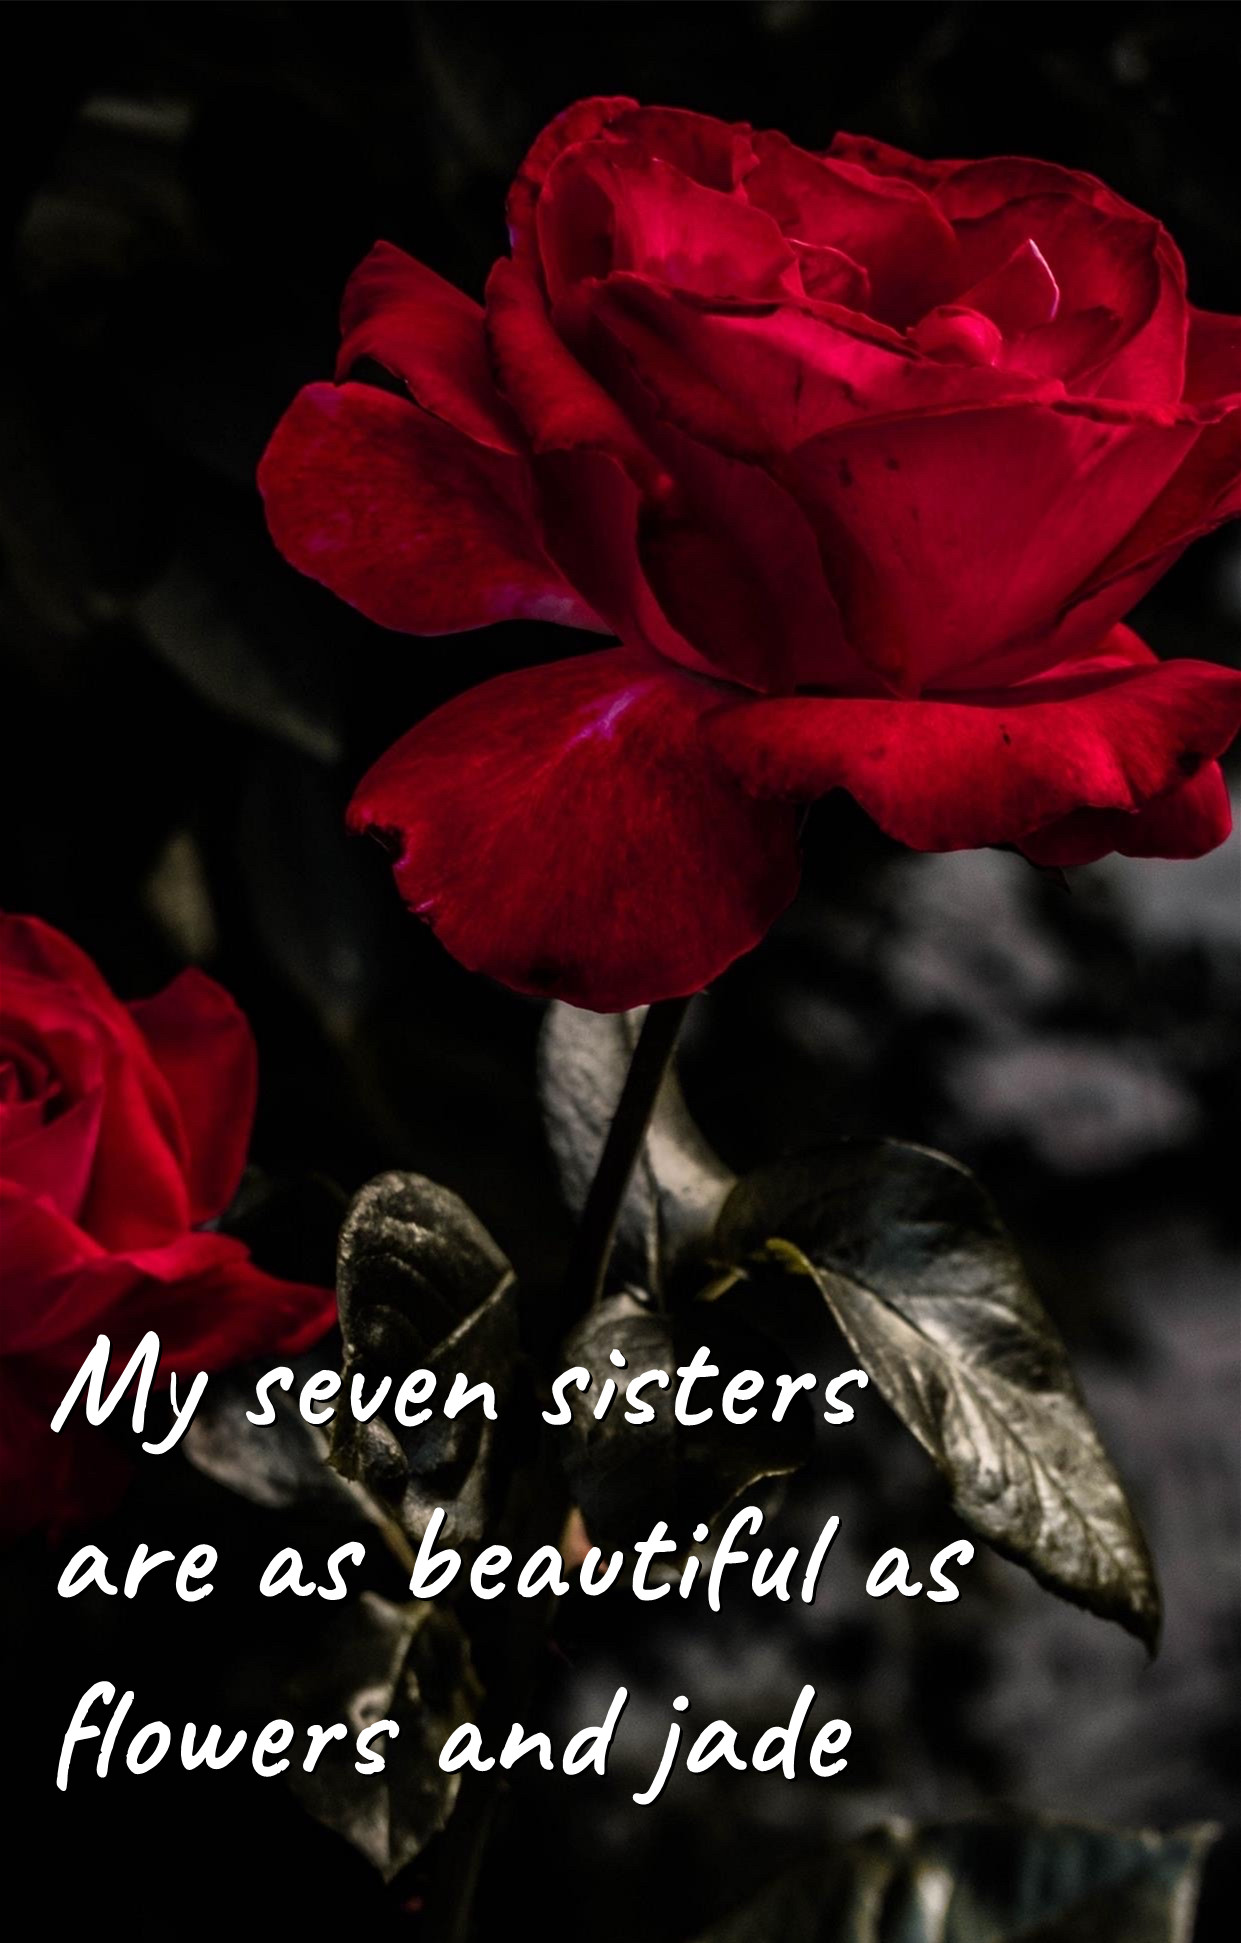 My seven sisters are as beautiful as flowers and jade